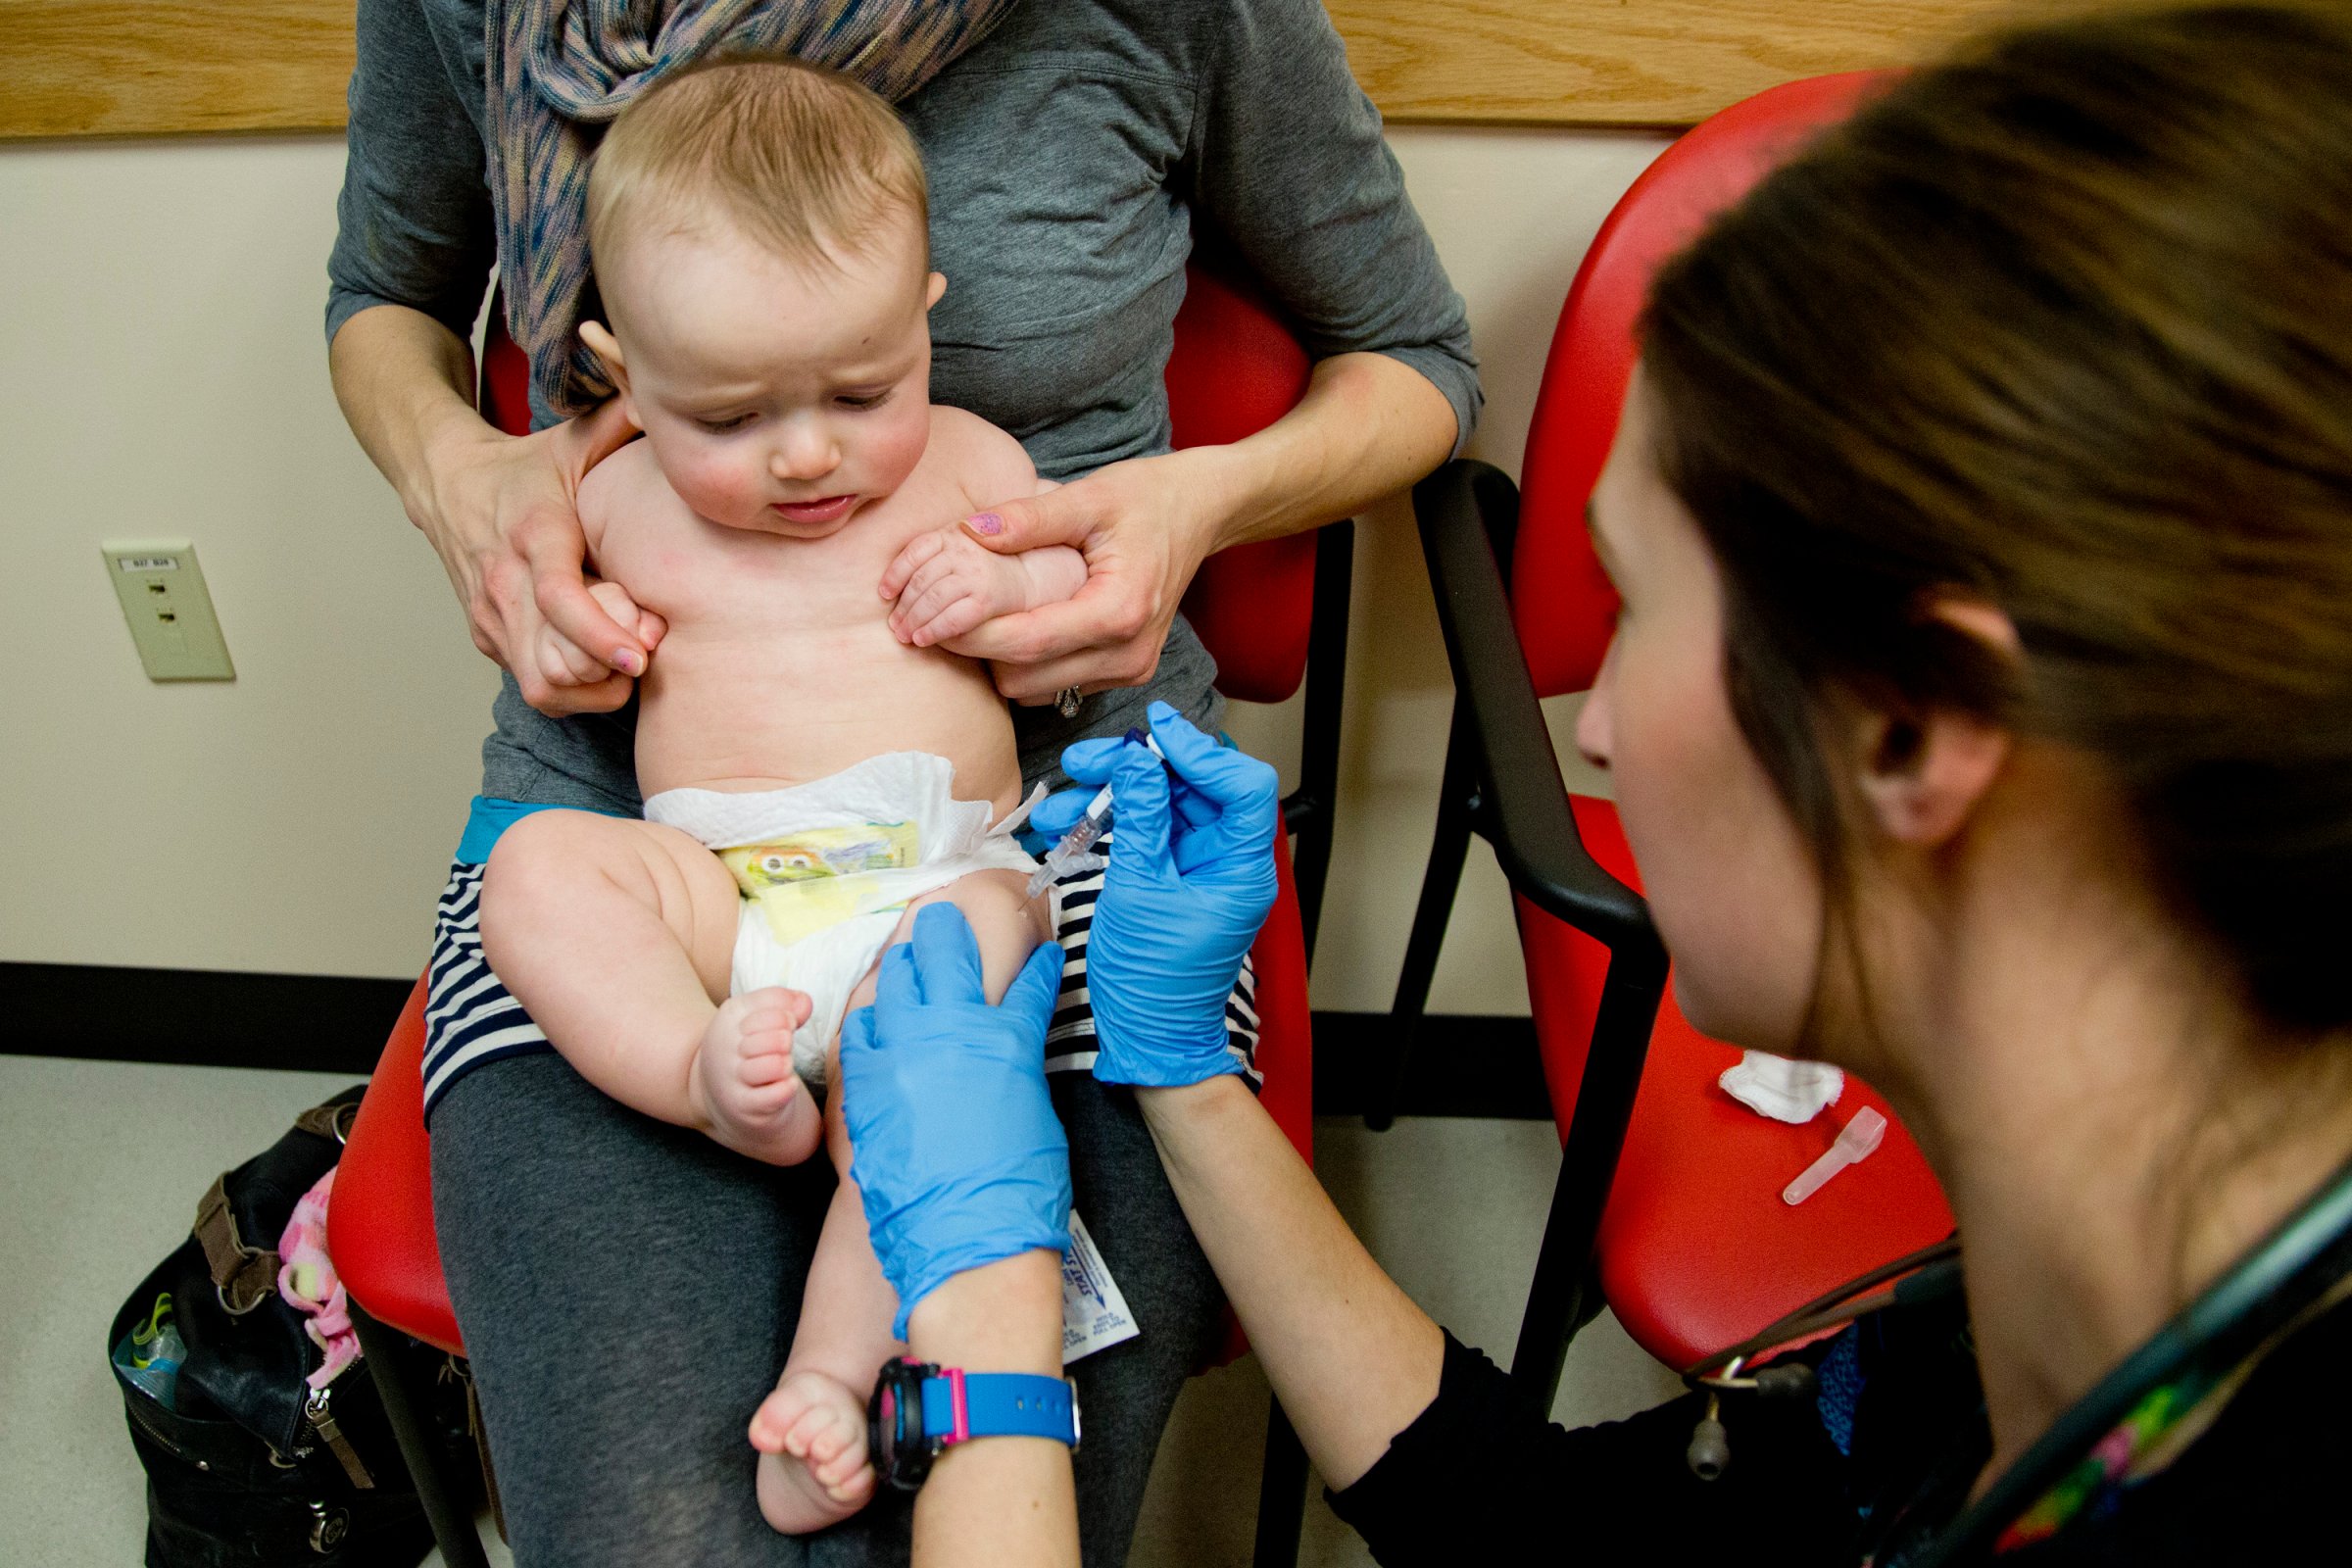 Sad baby, but smart mom: a child is vaccinated against meningitis in Portland, Me.